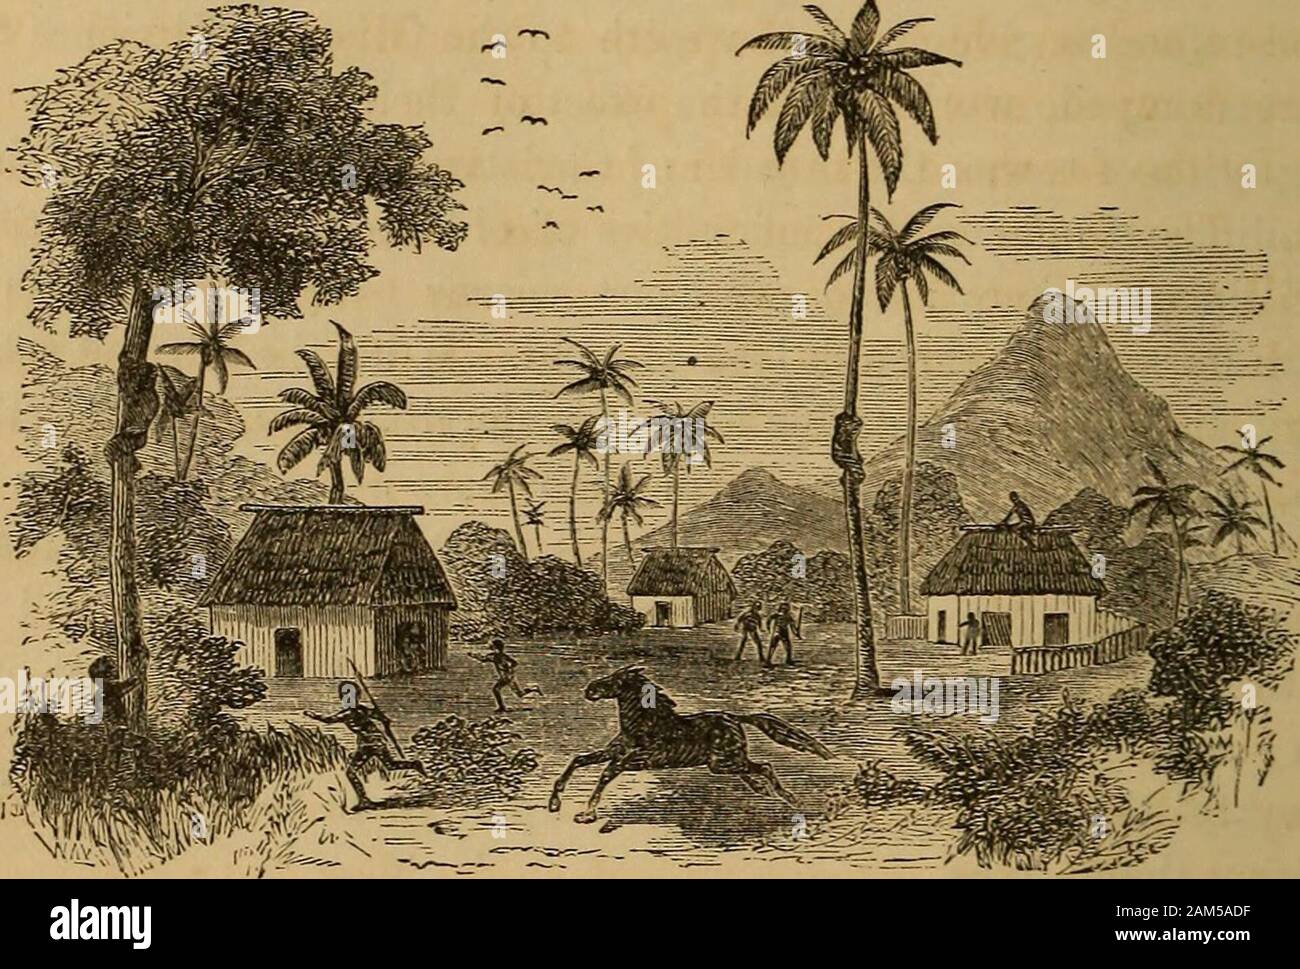 Fiji and the Fijians . gration of towns, the murder of Christians, the violation of chastity,the wailings of infancy, the infirmities of old age not only unpitied, butturned into mockery; and my heart yearns over those whose suffer-ings are unremoved through love of gold. If all the stirring scenes ofCalvary, and the unchangeable love of a merciful God, will not stir suchup to duty, could you not alarm their fears by exhibiting the fearfulconsequences of retaining more than is meet, when Christs,cause withsuffering humanity requires it % But you will be thinking, if I do notcease this strain, Stock Photo